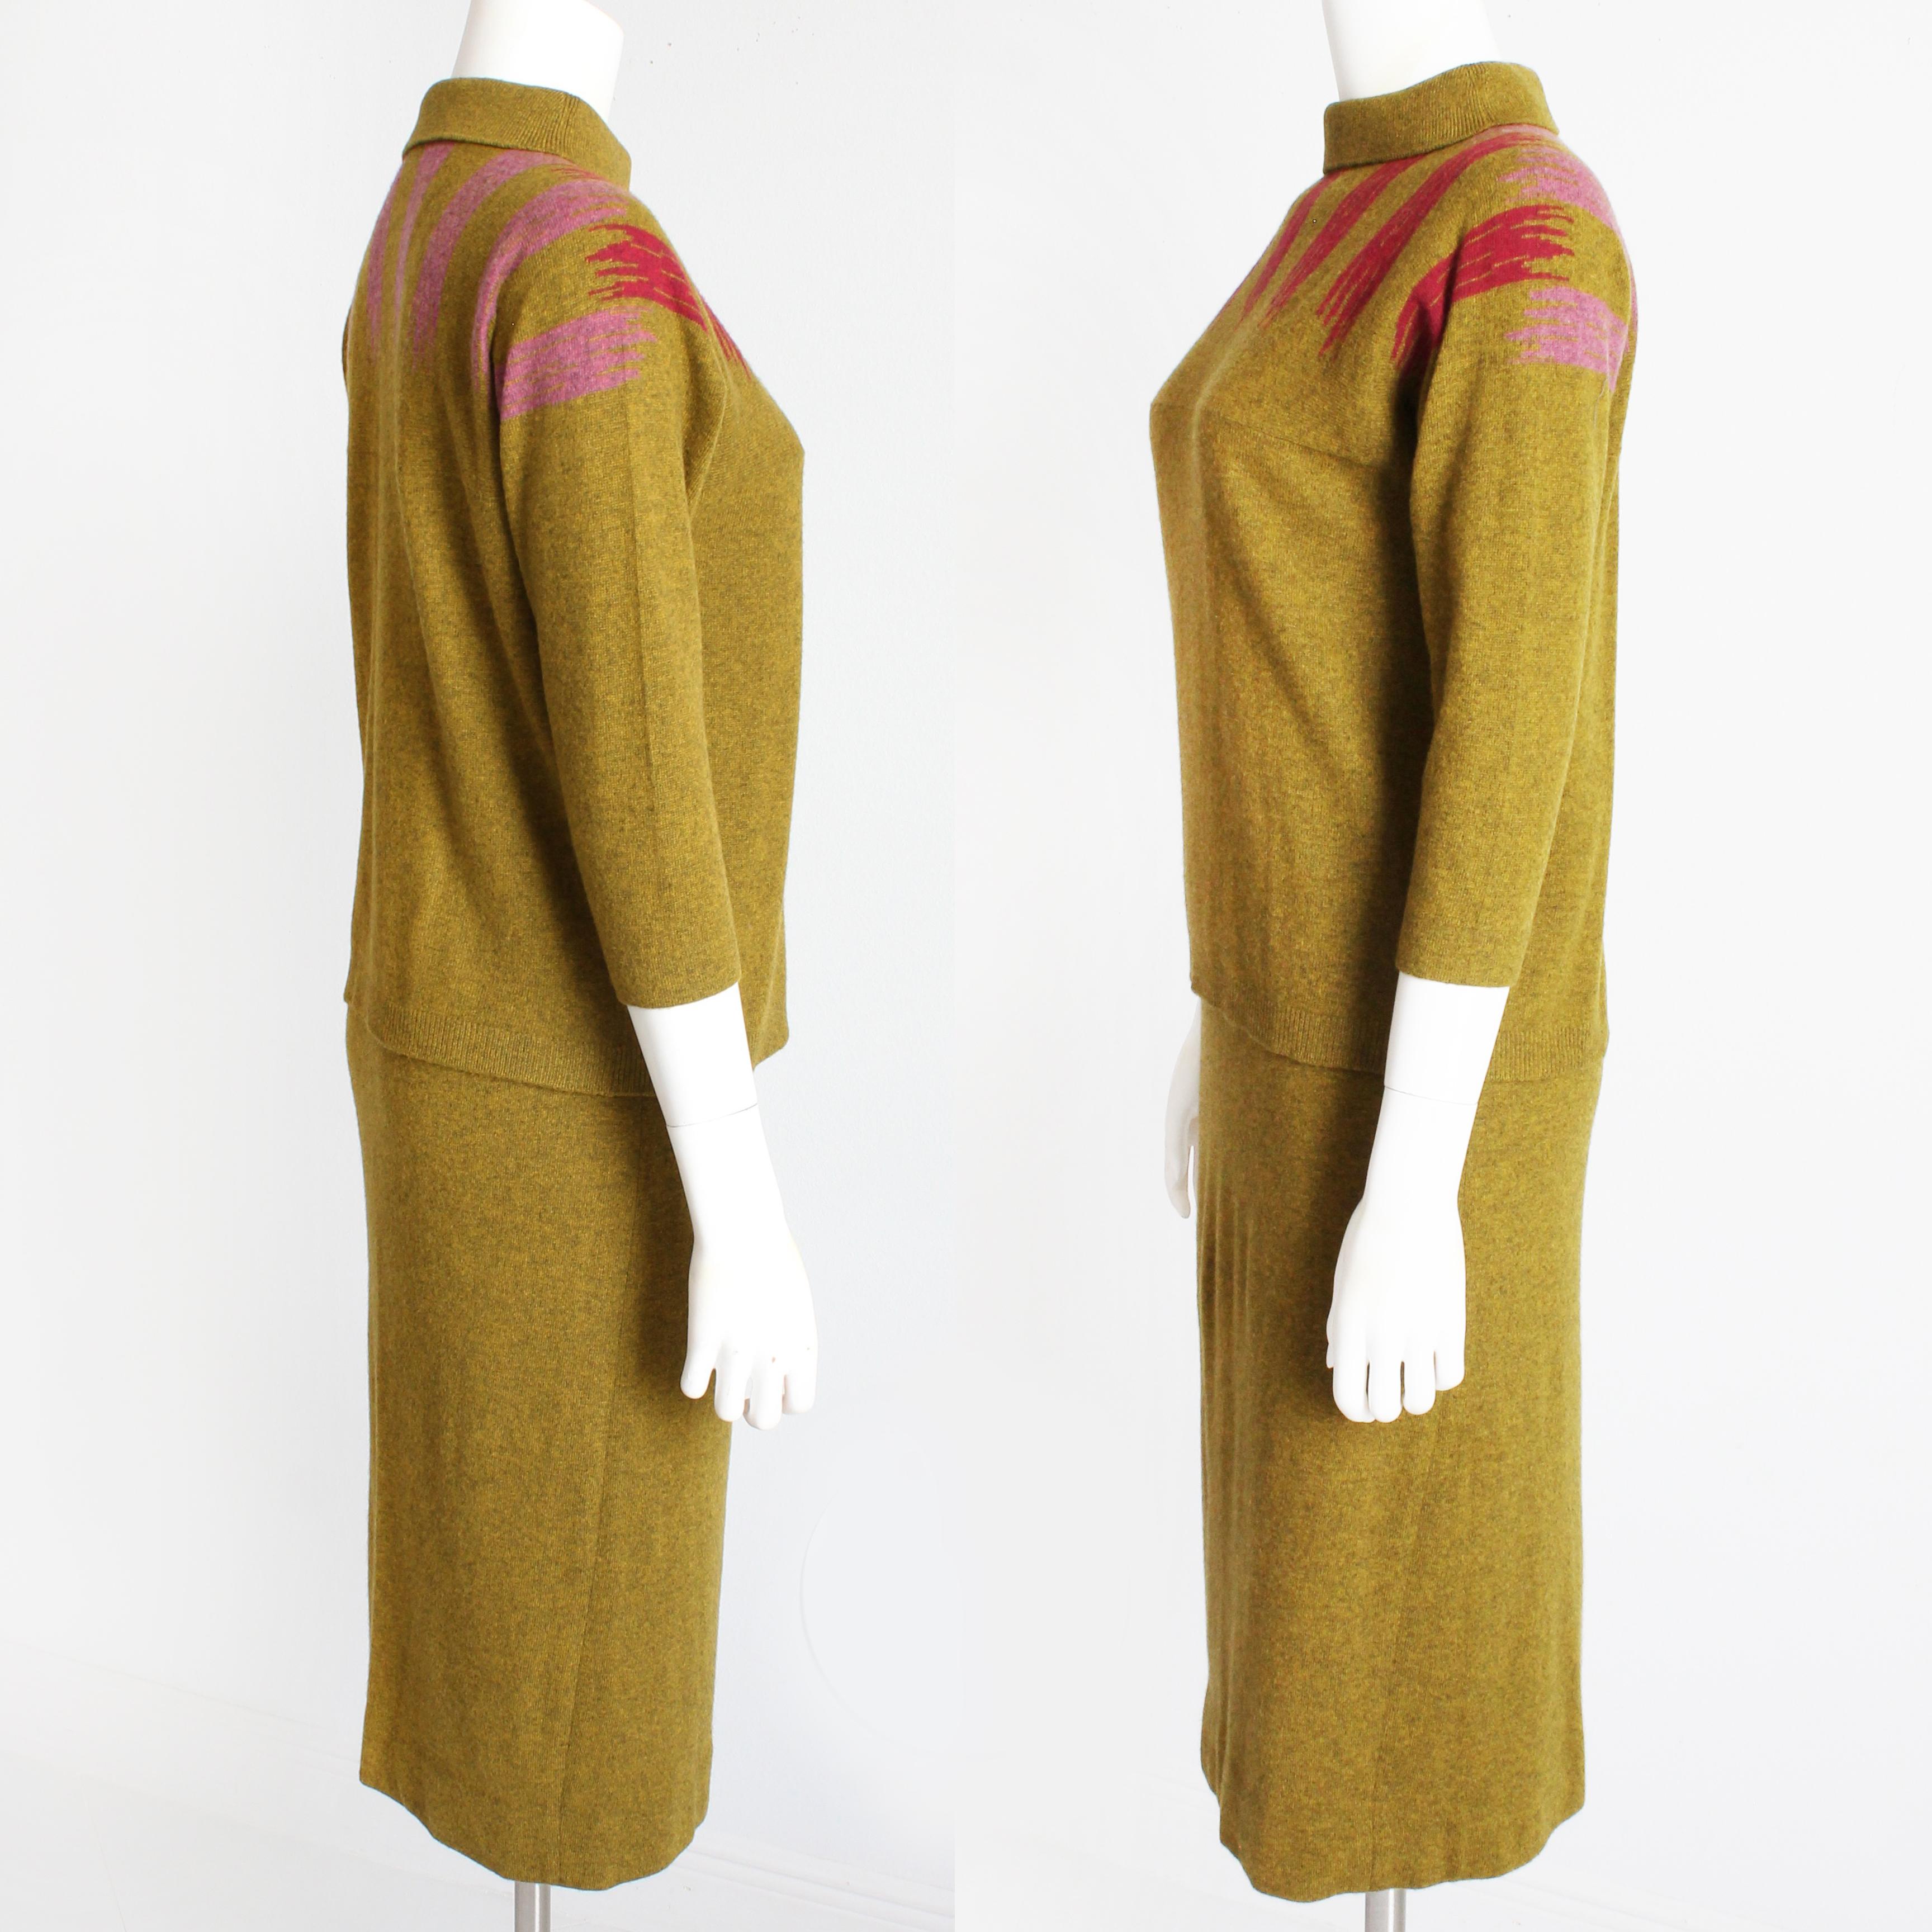 Bonnie Cashin Cashmere Suit Sweater and Skirt 2pc Intarsia Knit Saks 1960s Rare For Sale 2